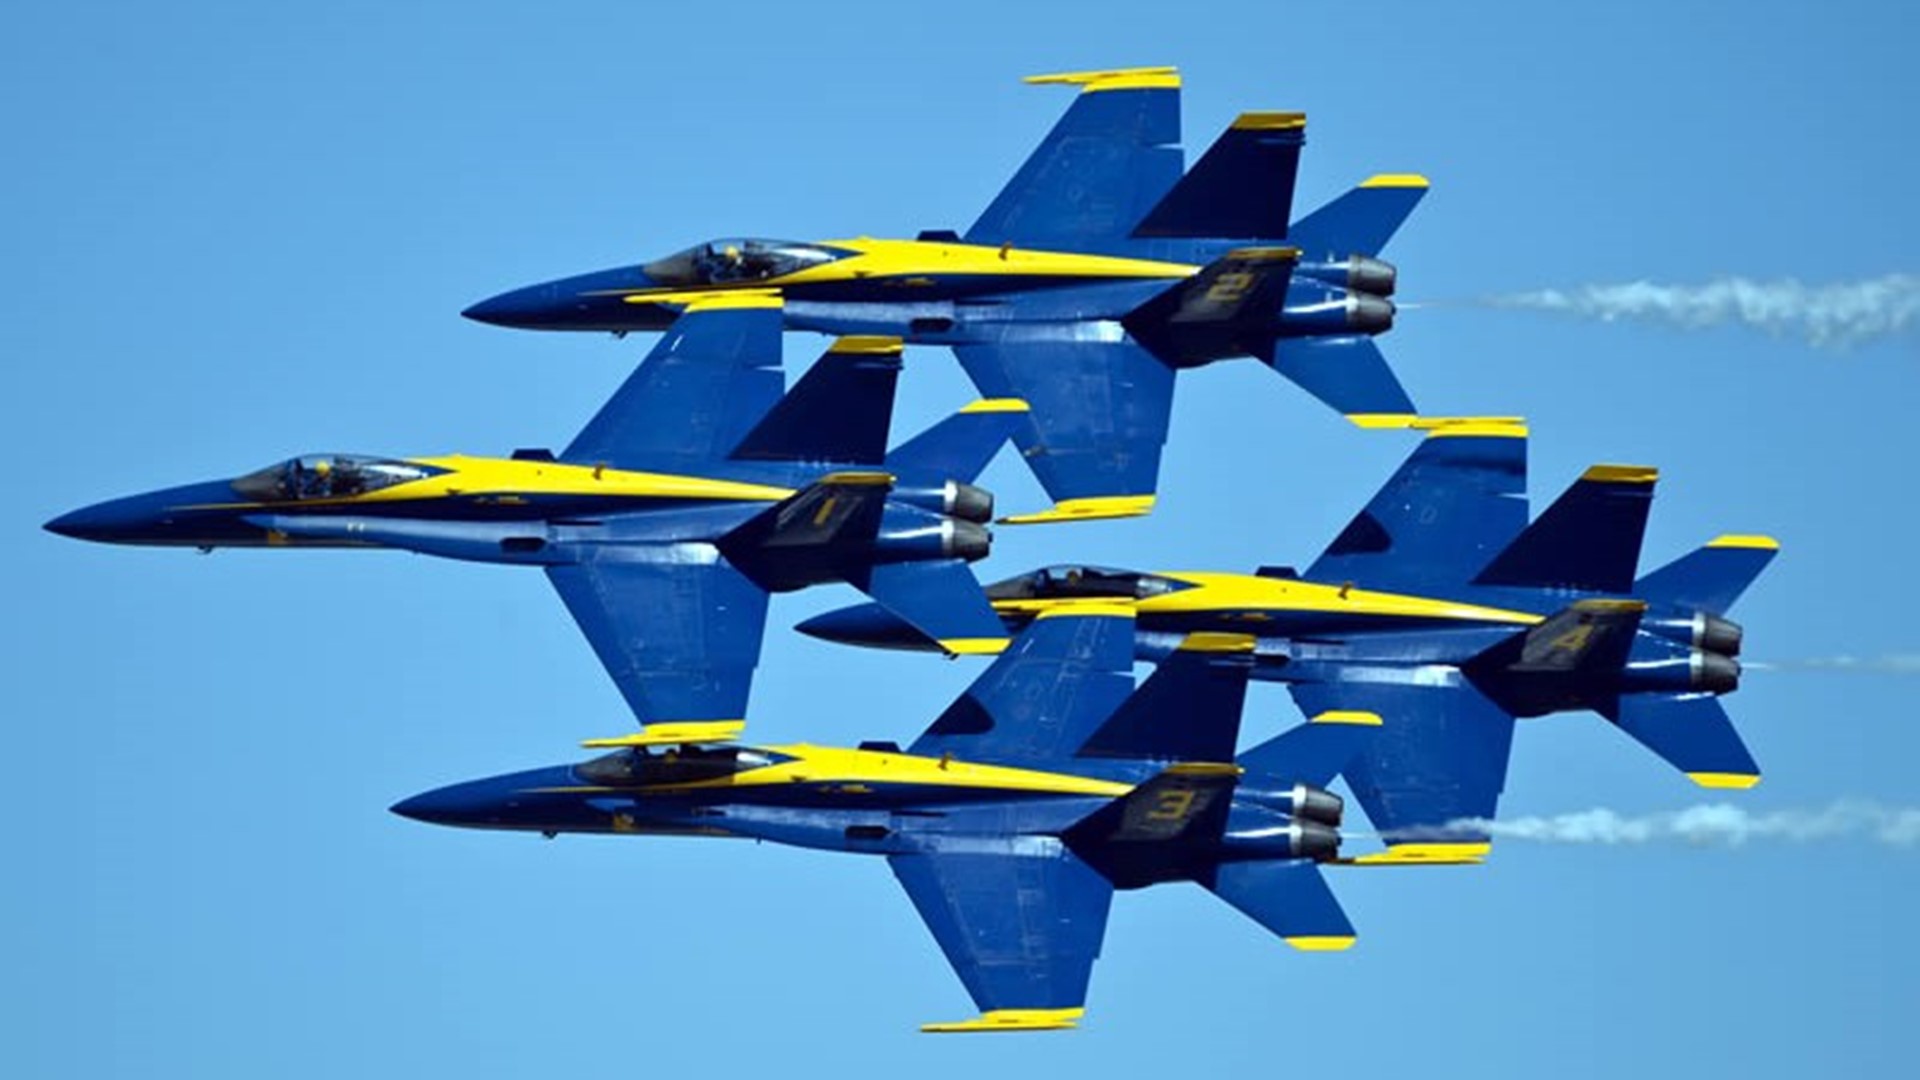 "The Blue Angels" is a new documentary about the Navy's Blue Angels. Mark S. Allen breaks down everything you need to know about the movie showing on IMAX screens.